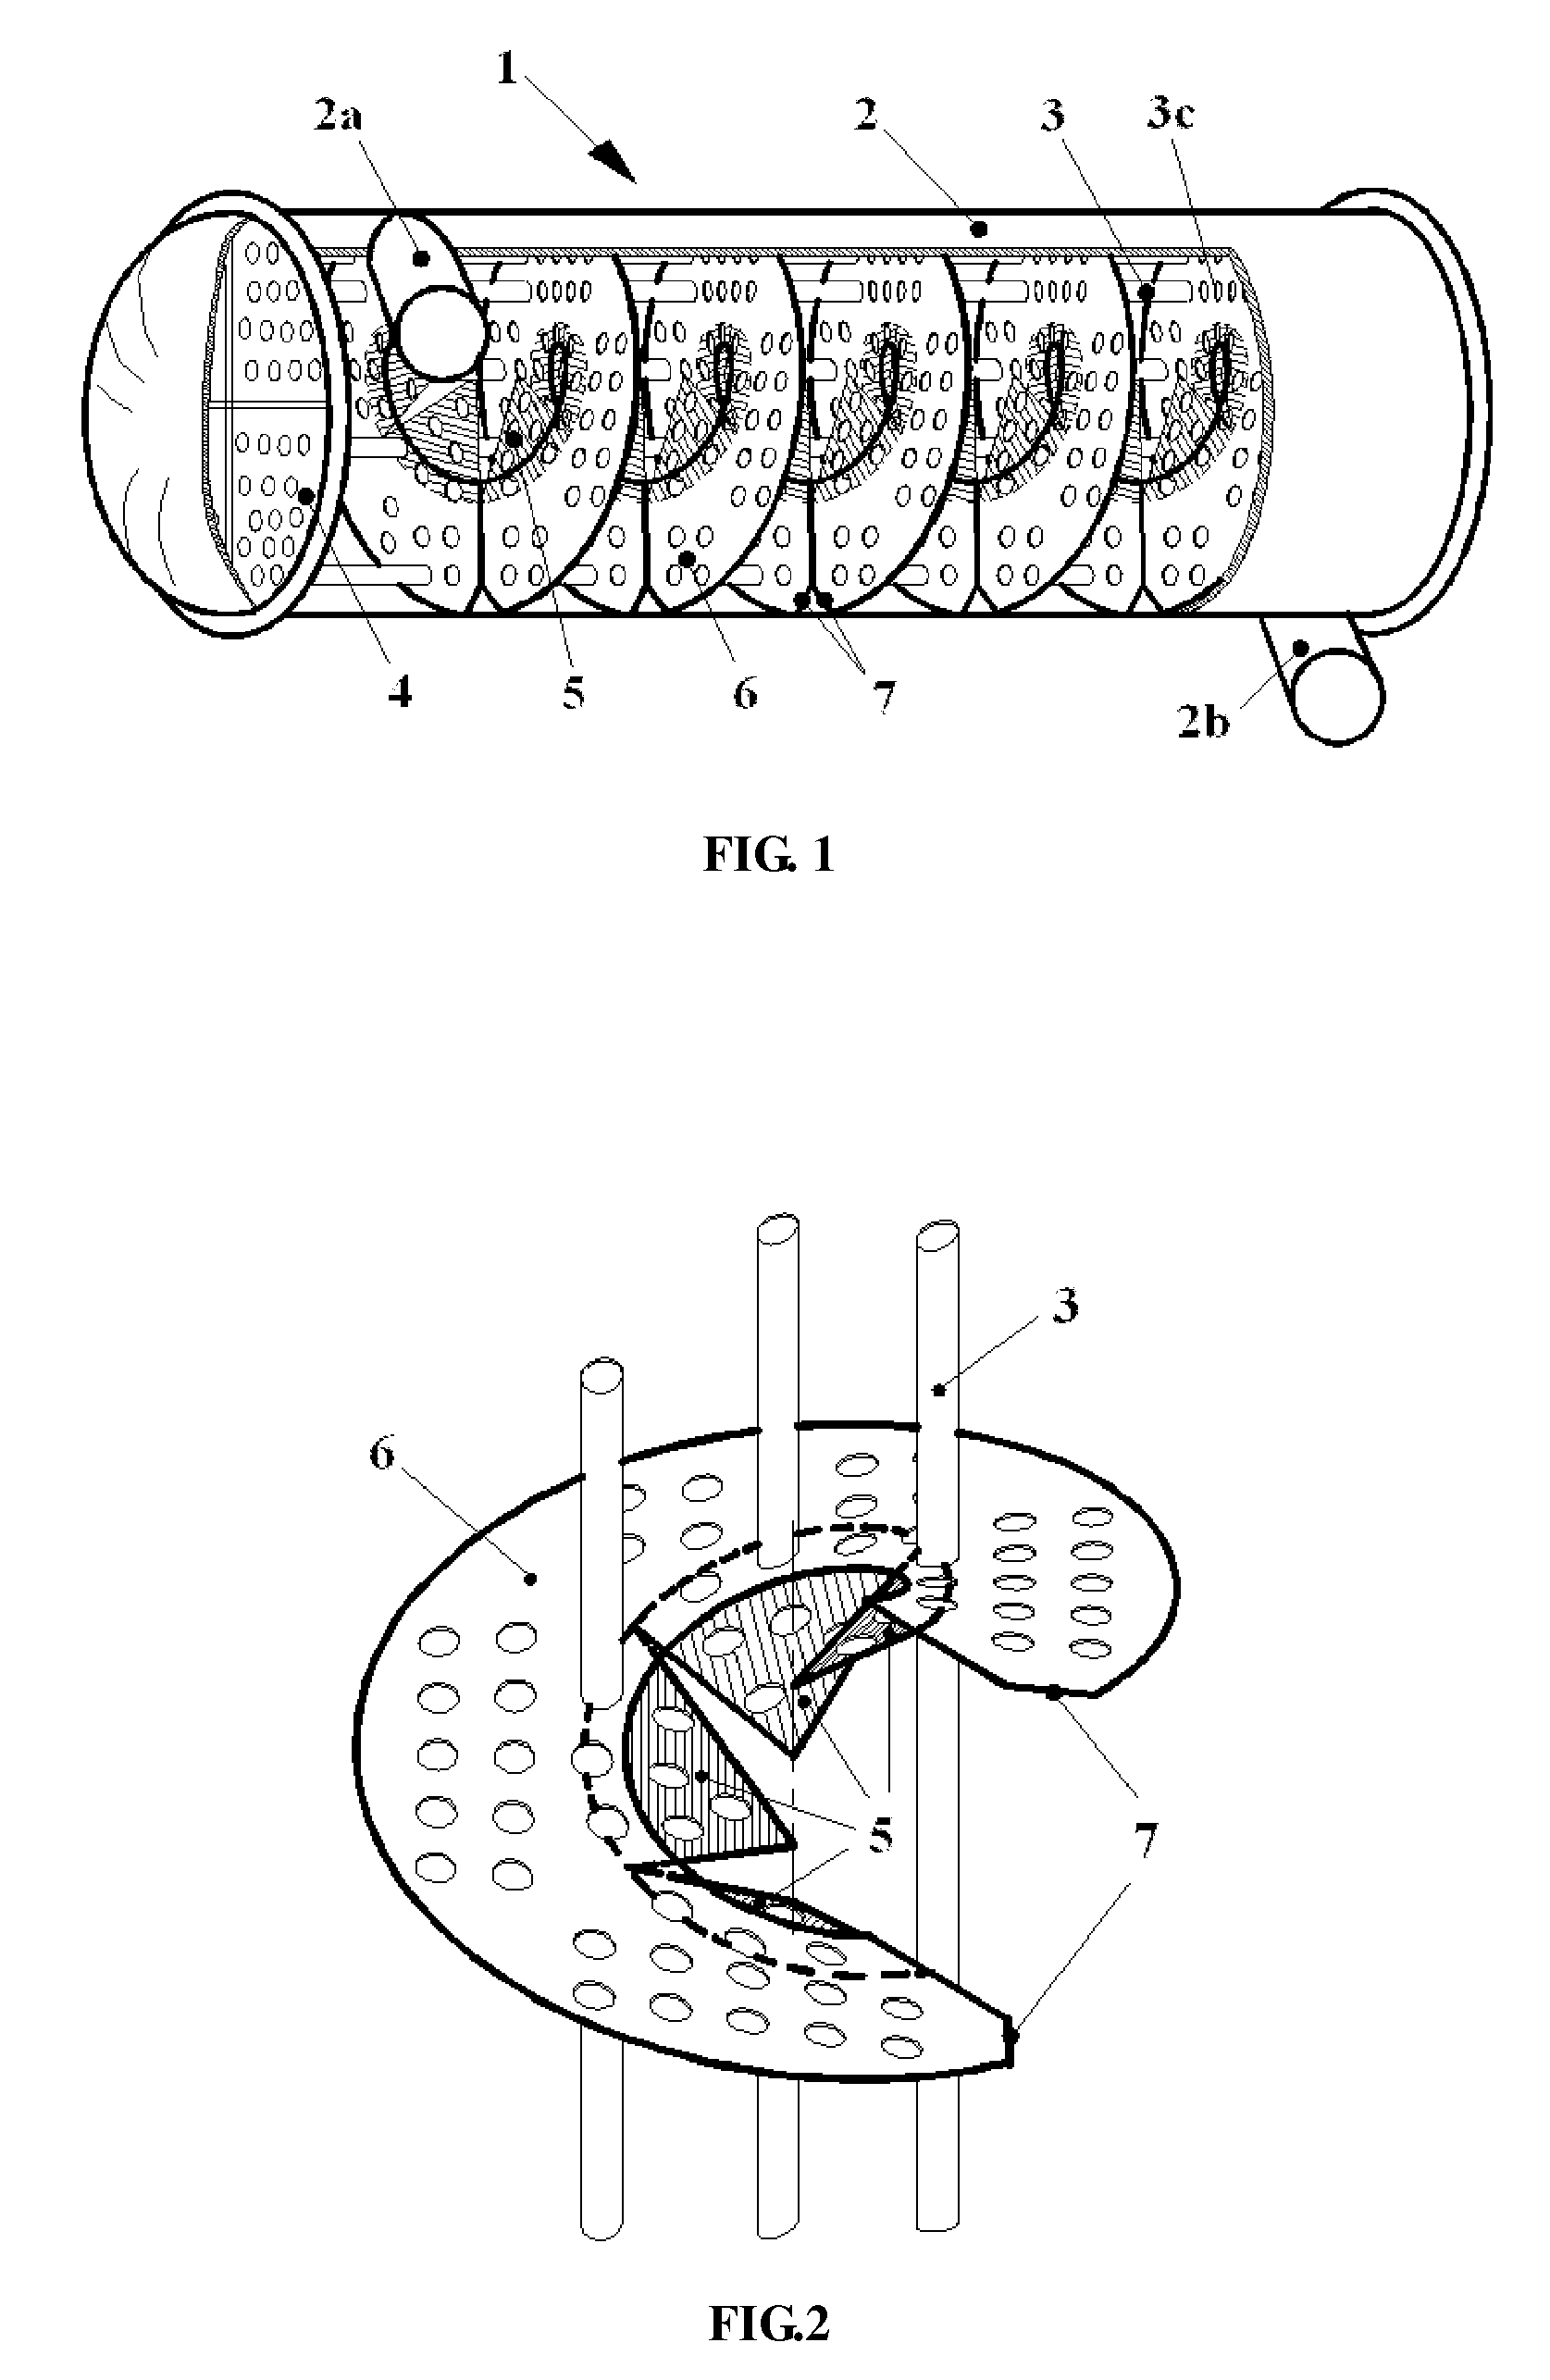 Single shell-pass or multiple shell-pass shell-and-tube heat exchanger with helical baffles